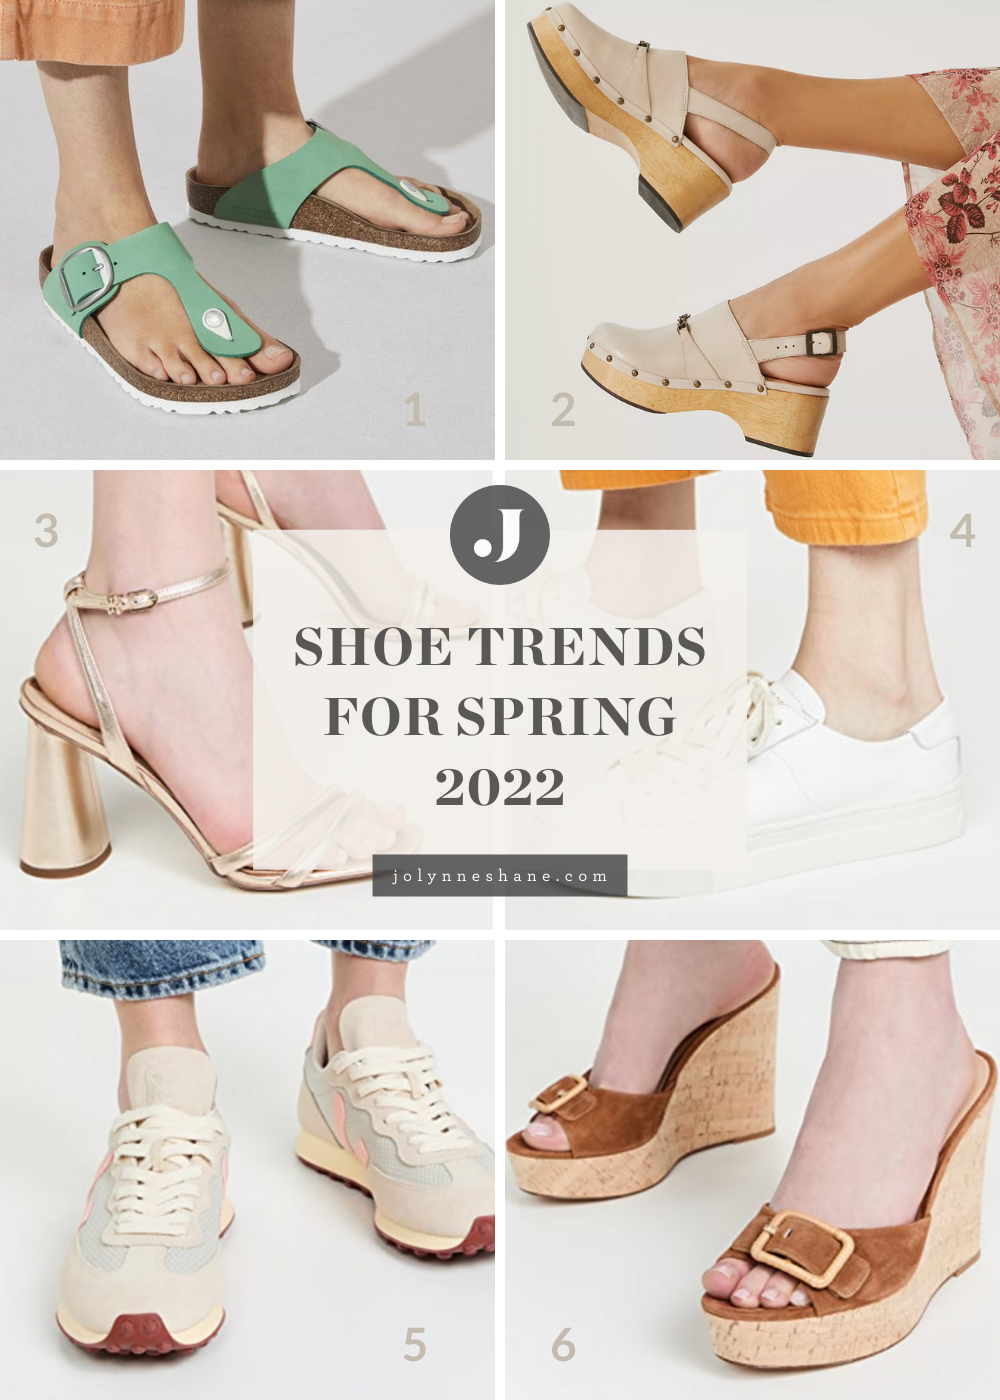  Shoe Trends for Spring 2022